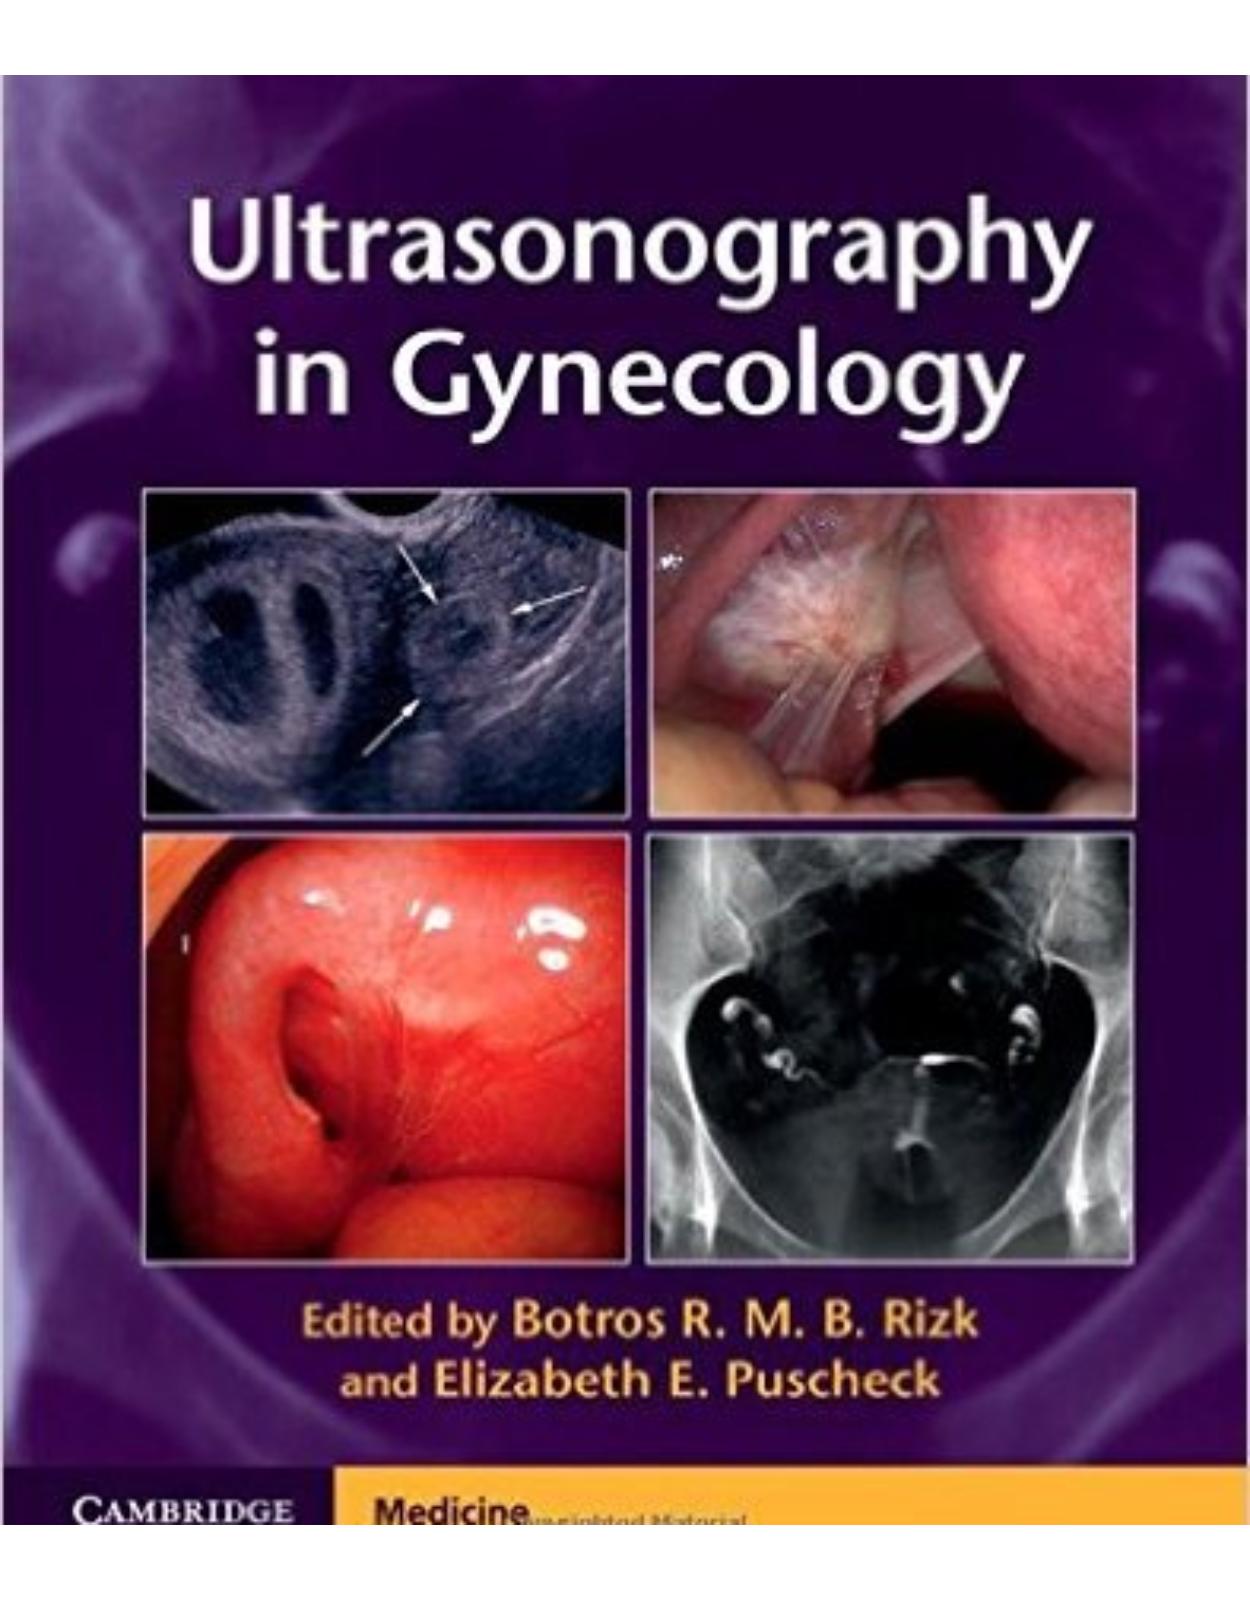 Ultrasonography in Gynecology